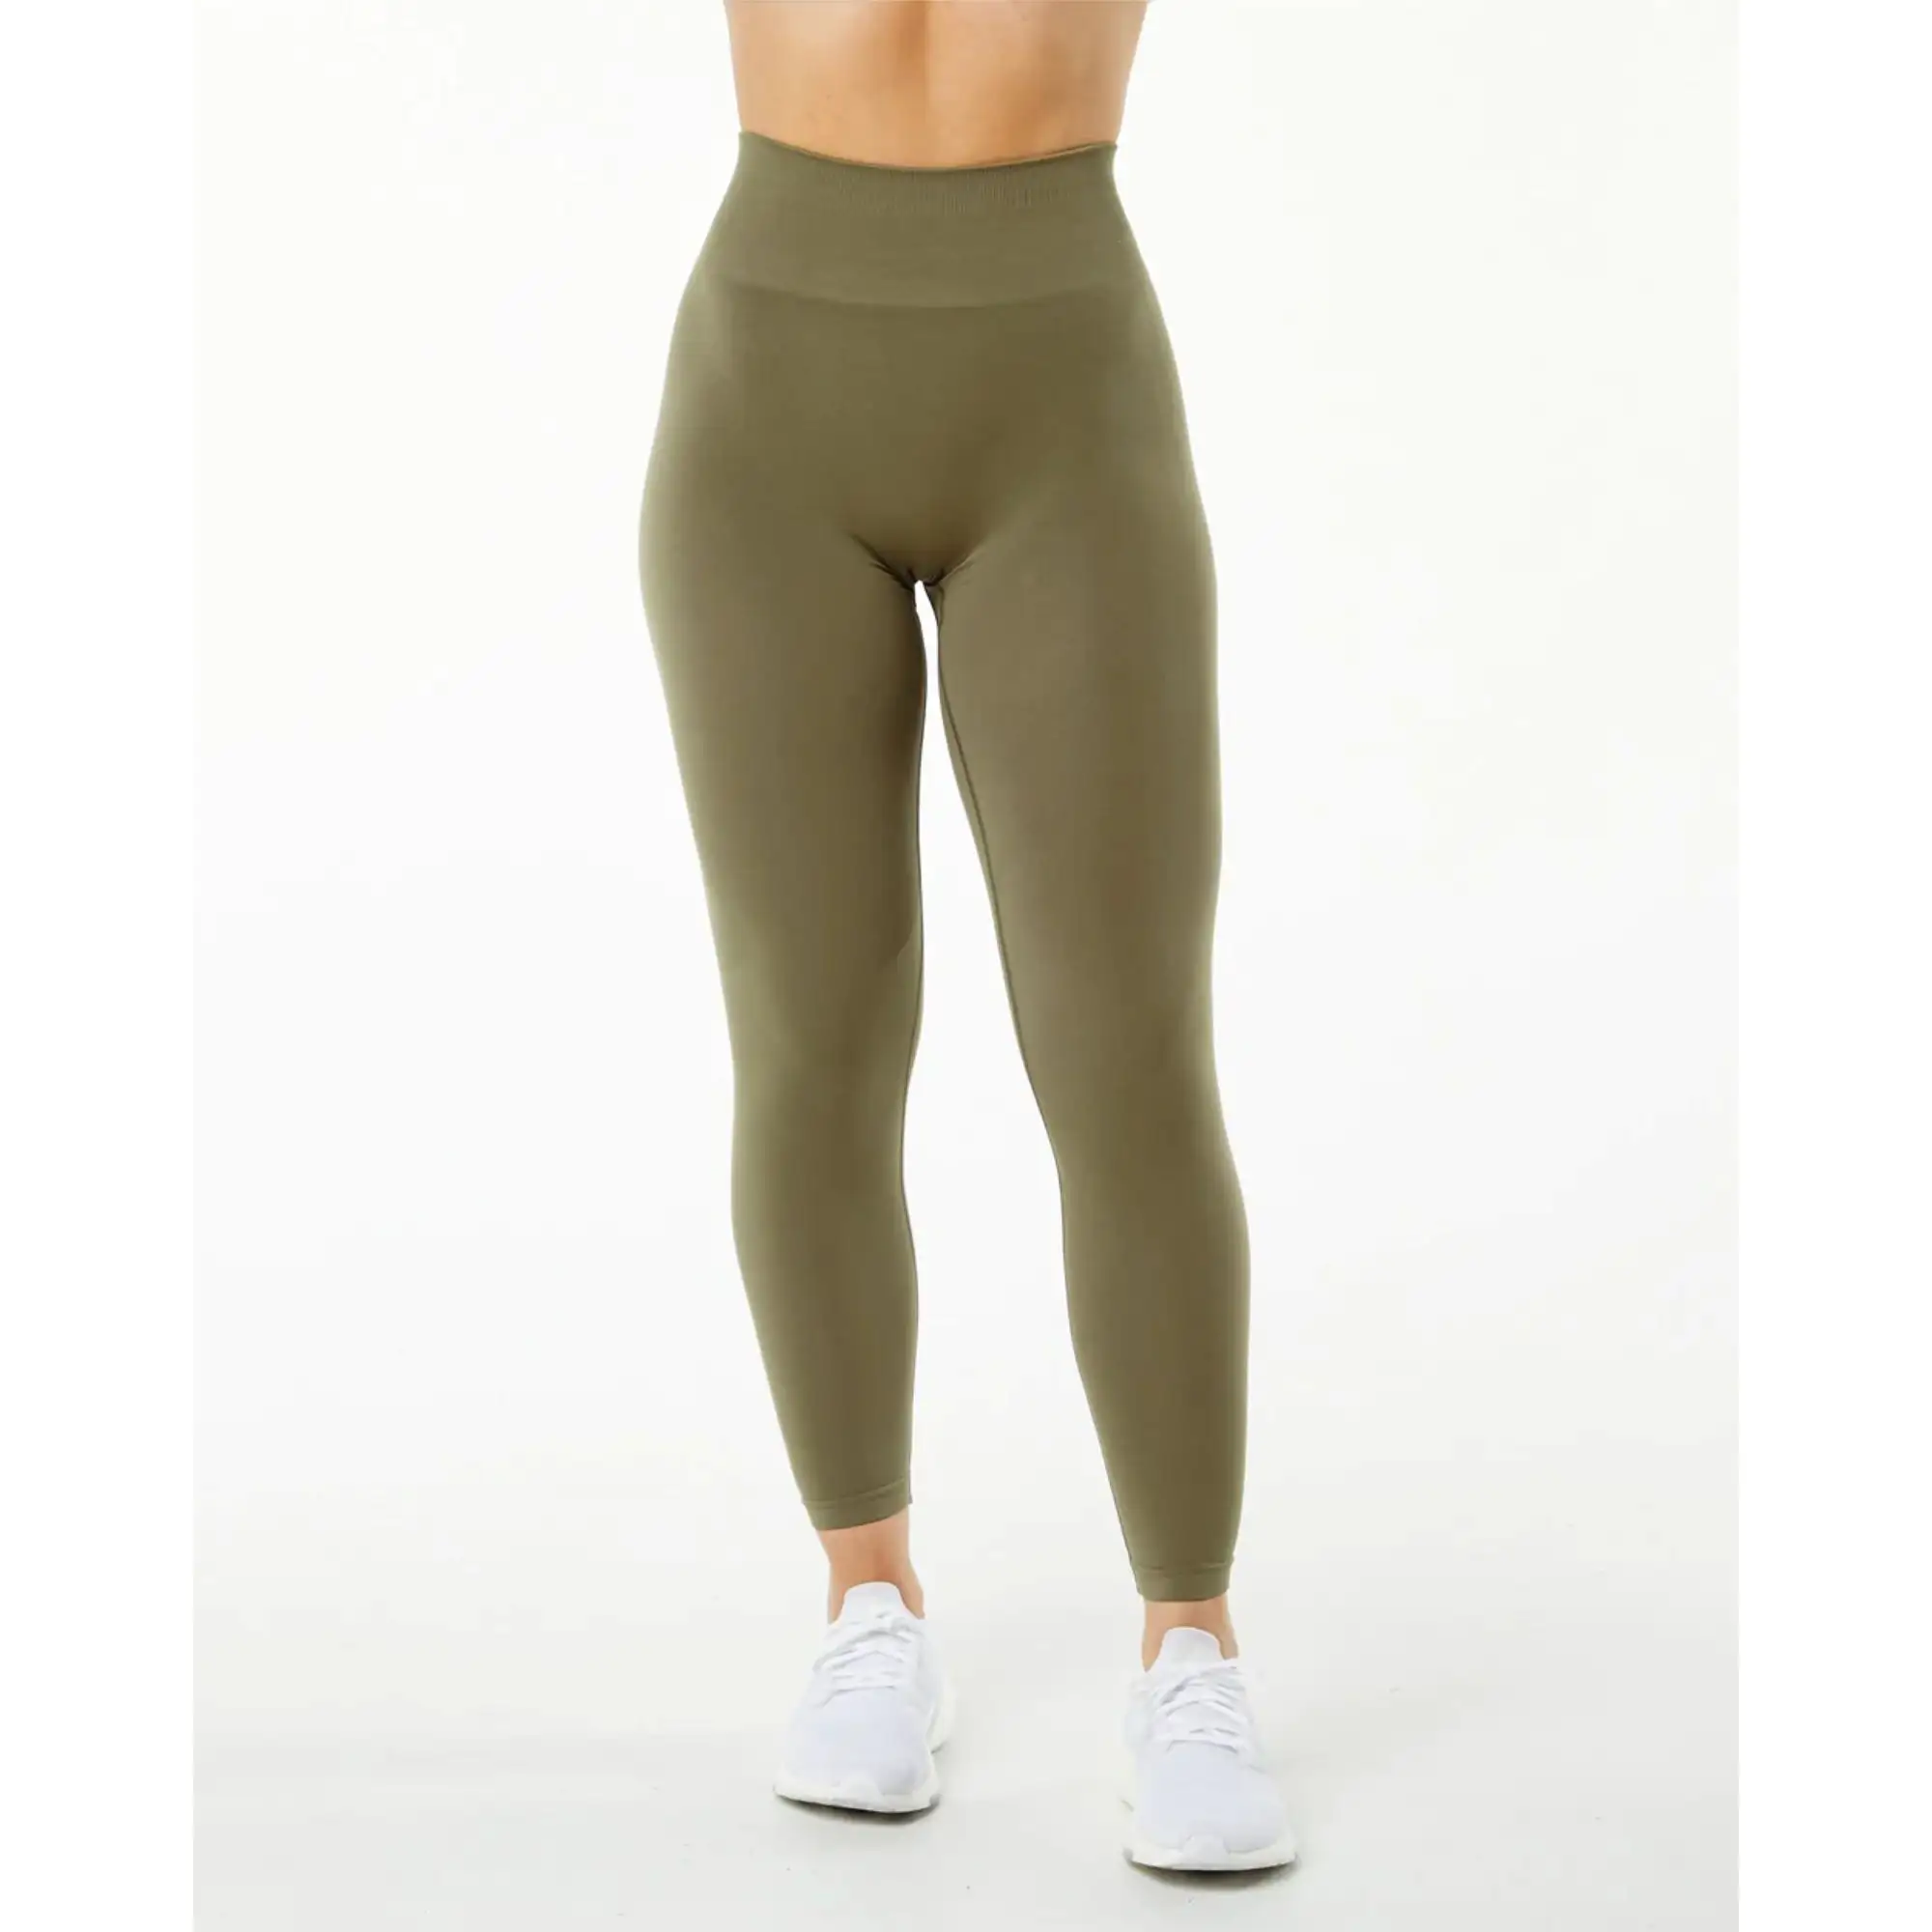 Seamless Knit Fabric 51% Polyamide 38% Polyester 11% Elastane Tapered High Waisted Willow Womens Seamless Scrunch Legging